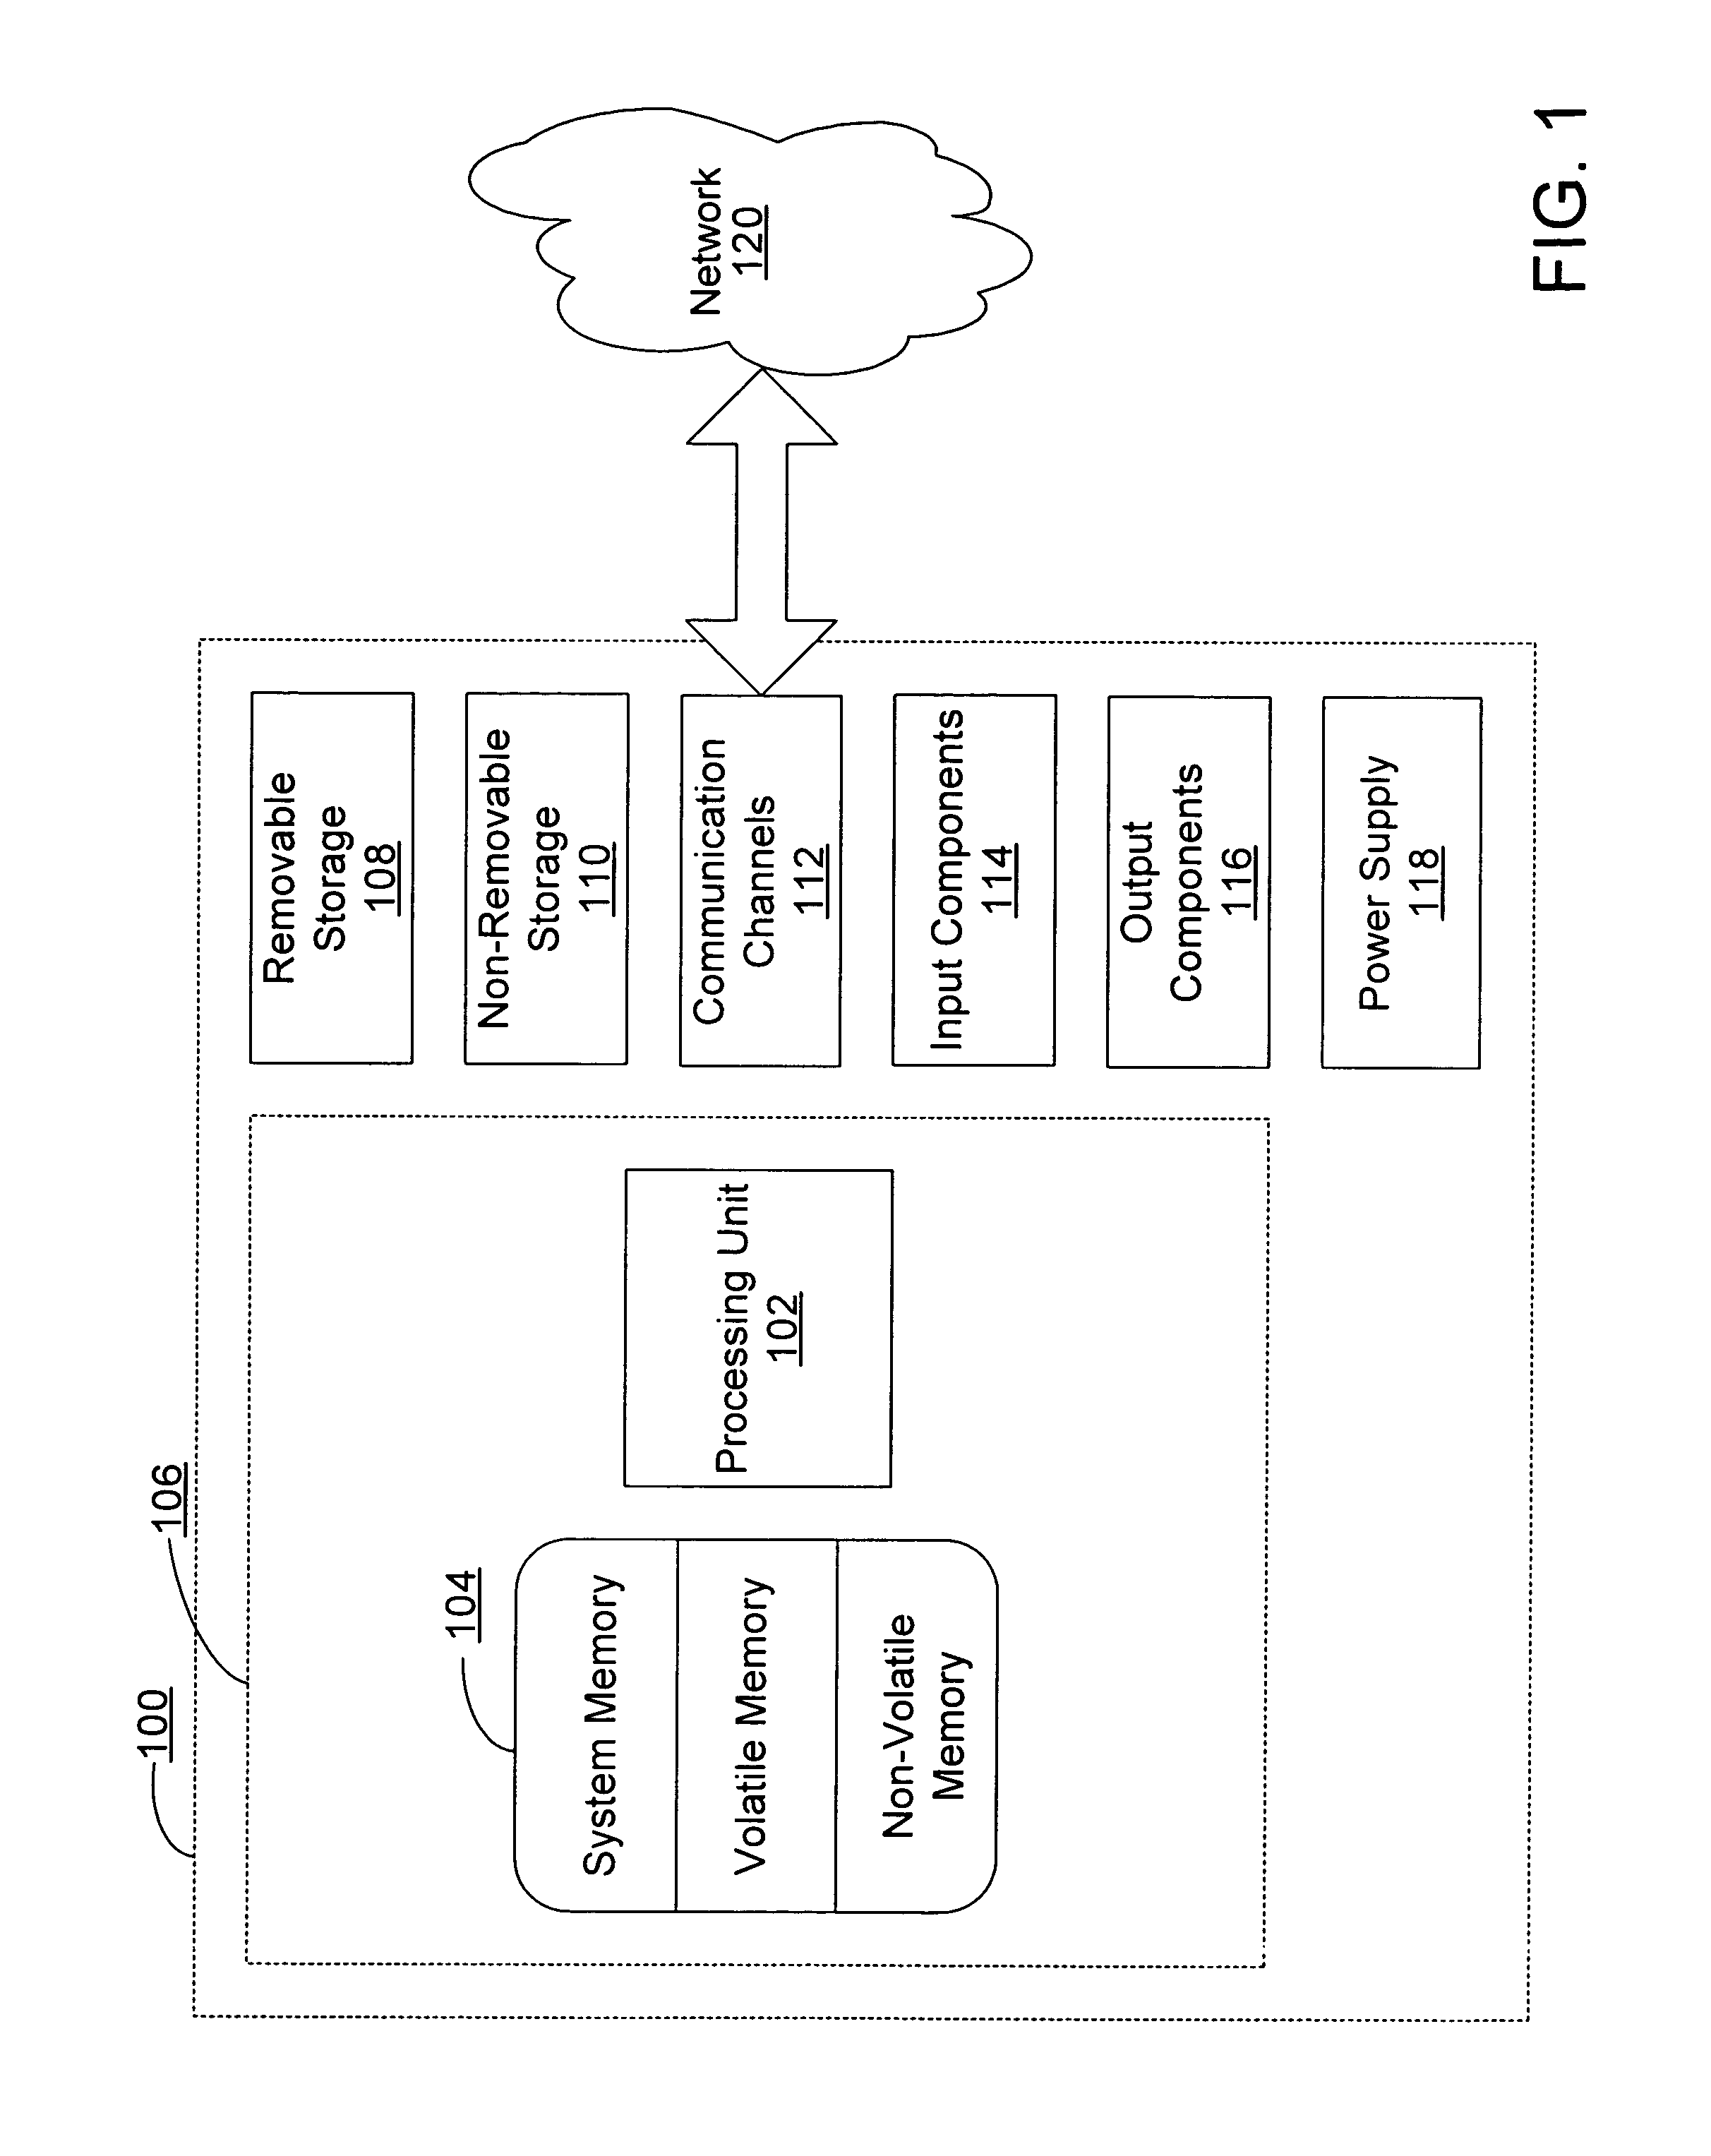 Method for persisting a unicode compatible offline address